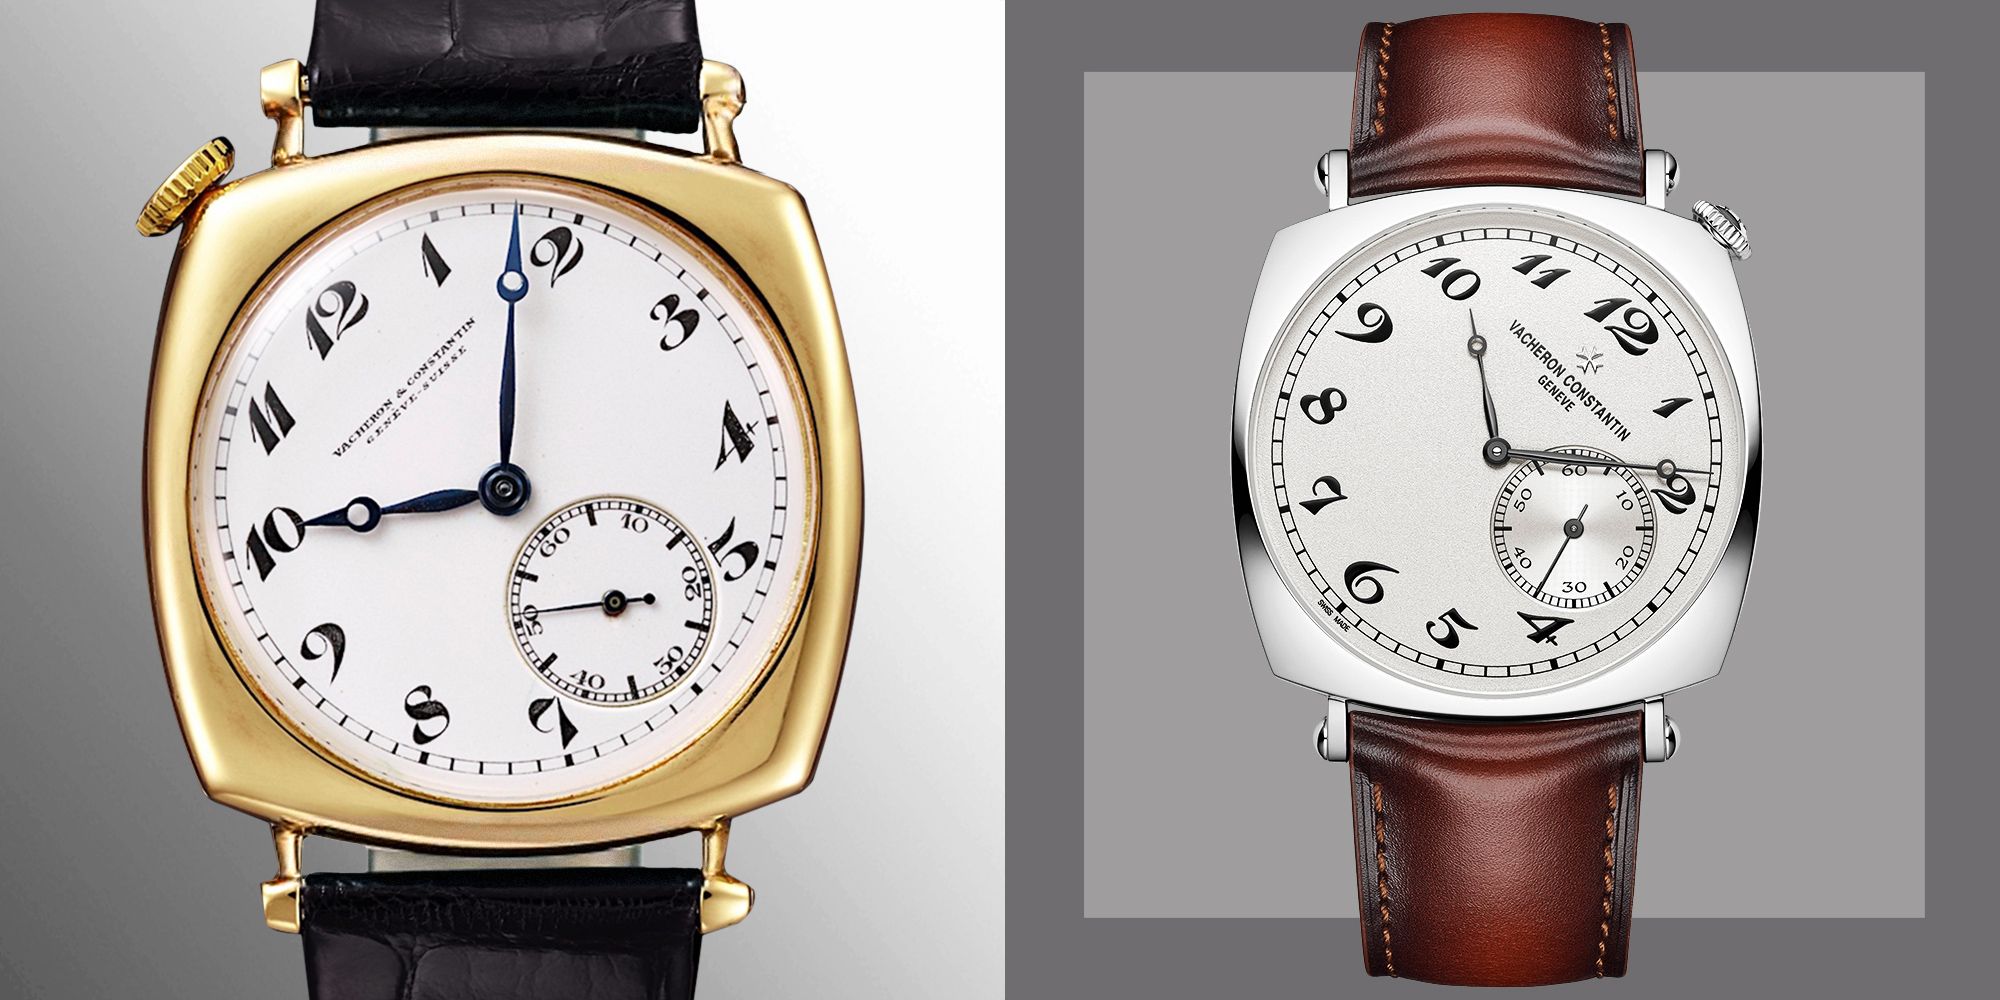 Shop Used Vacheron Constantin Watches – Signature Watches